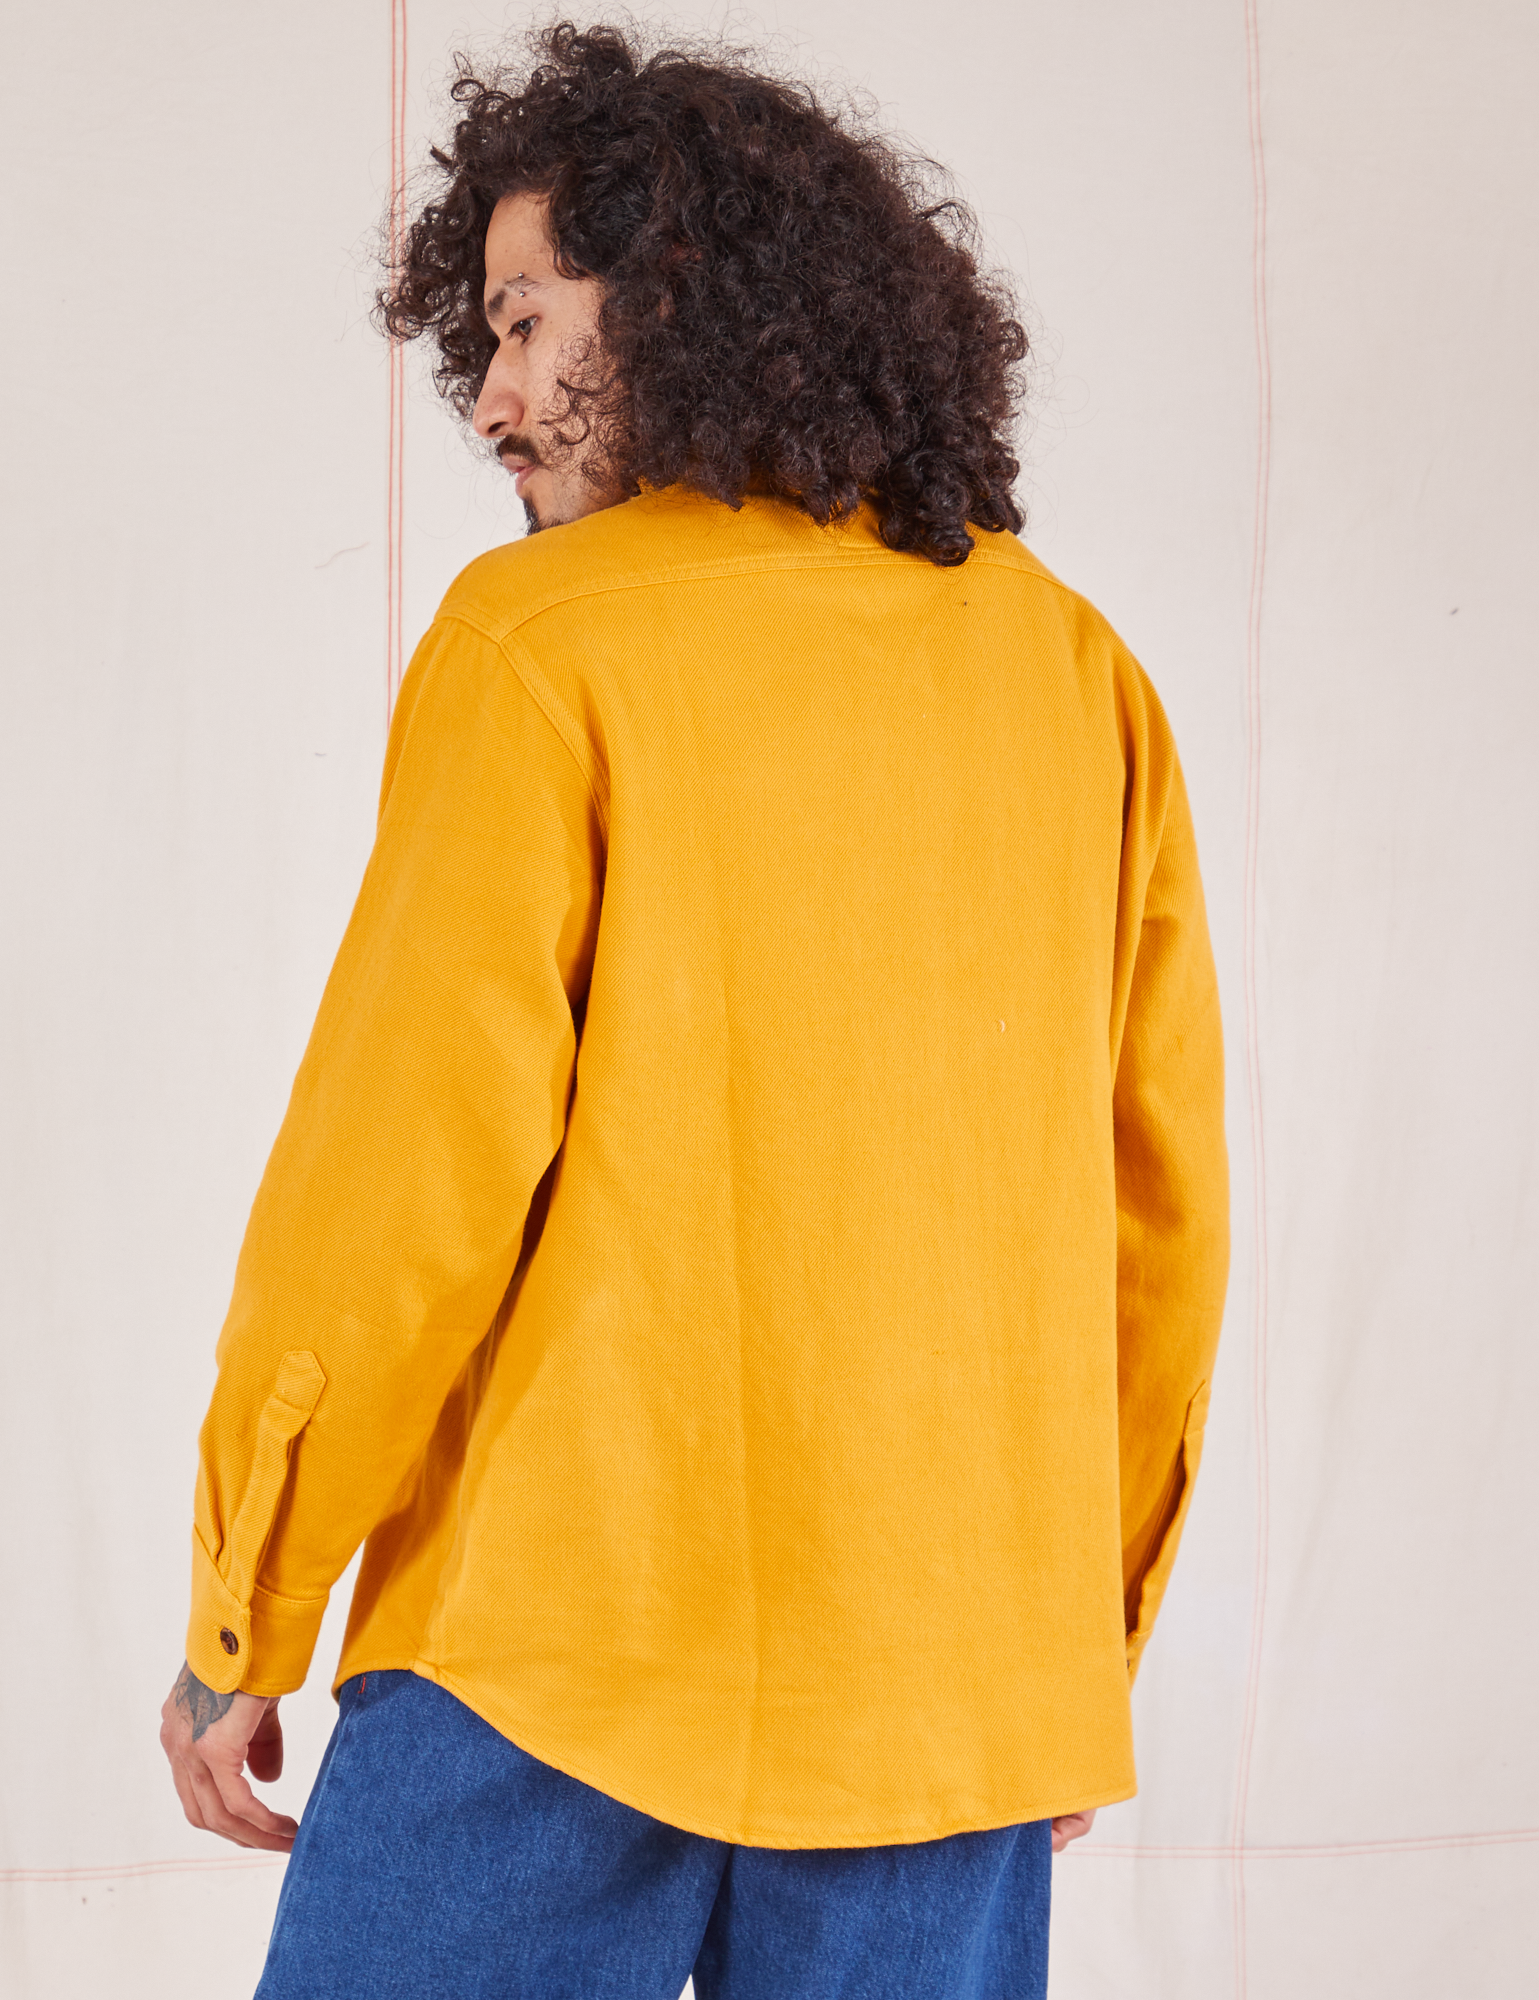 Back view of Flannel Overshirt in Mustard Yellow on Jesse